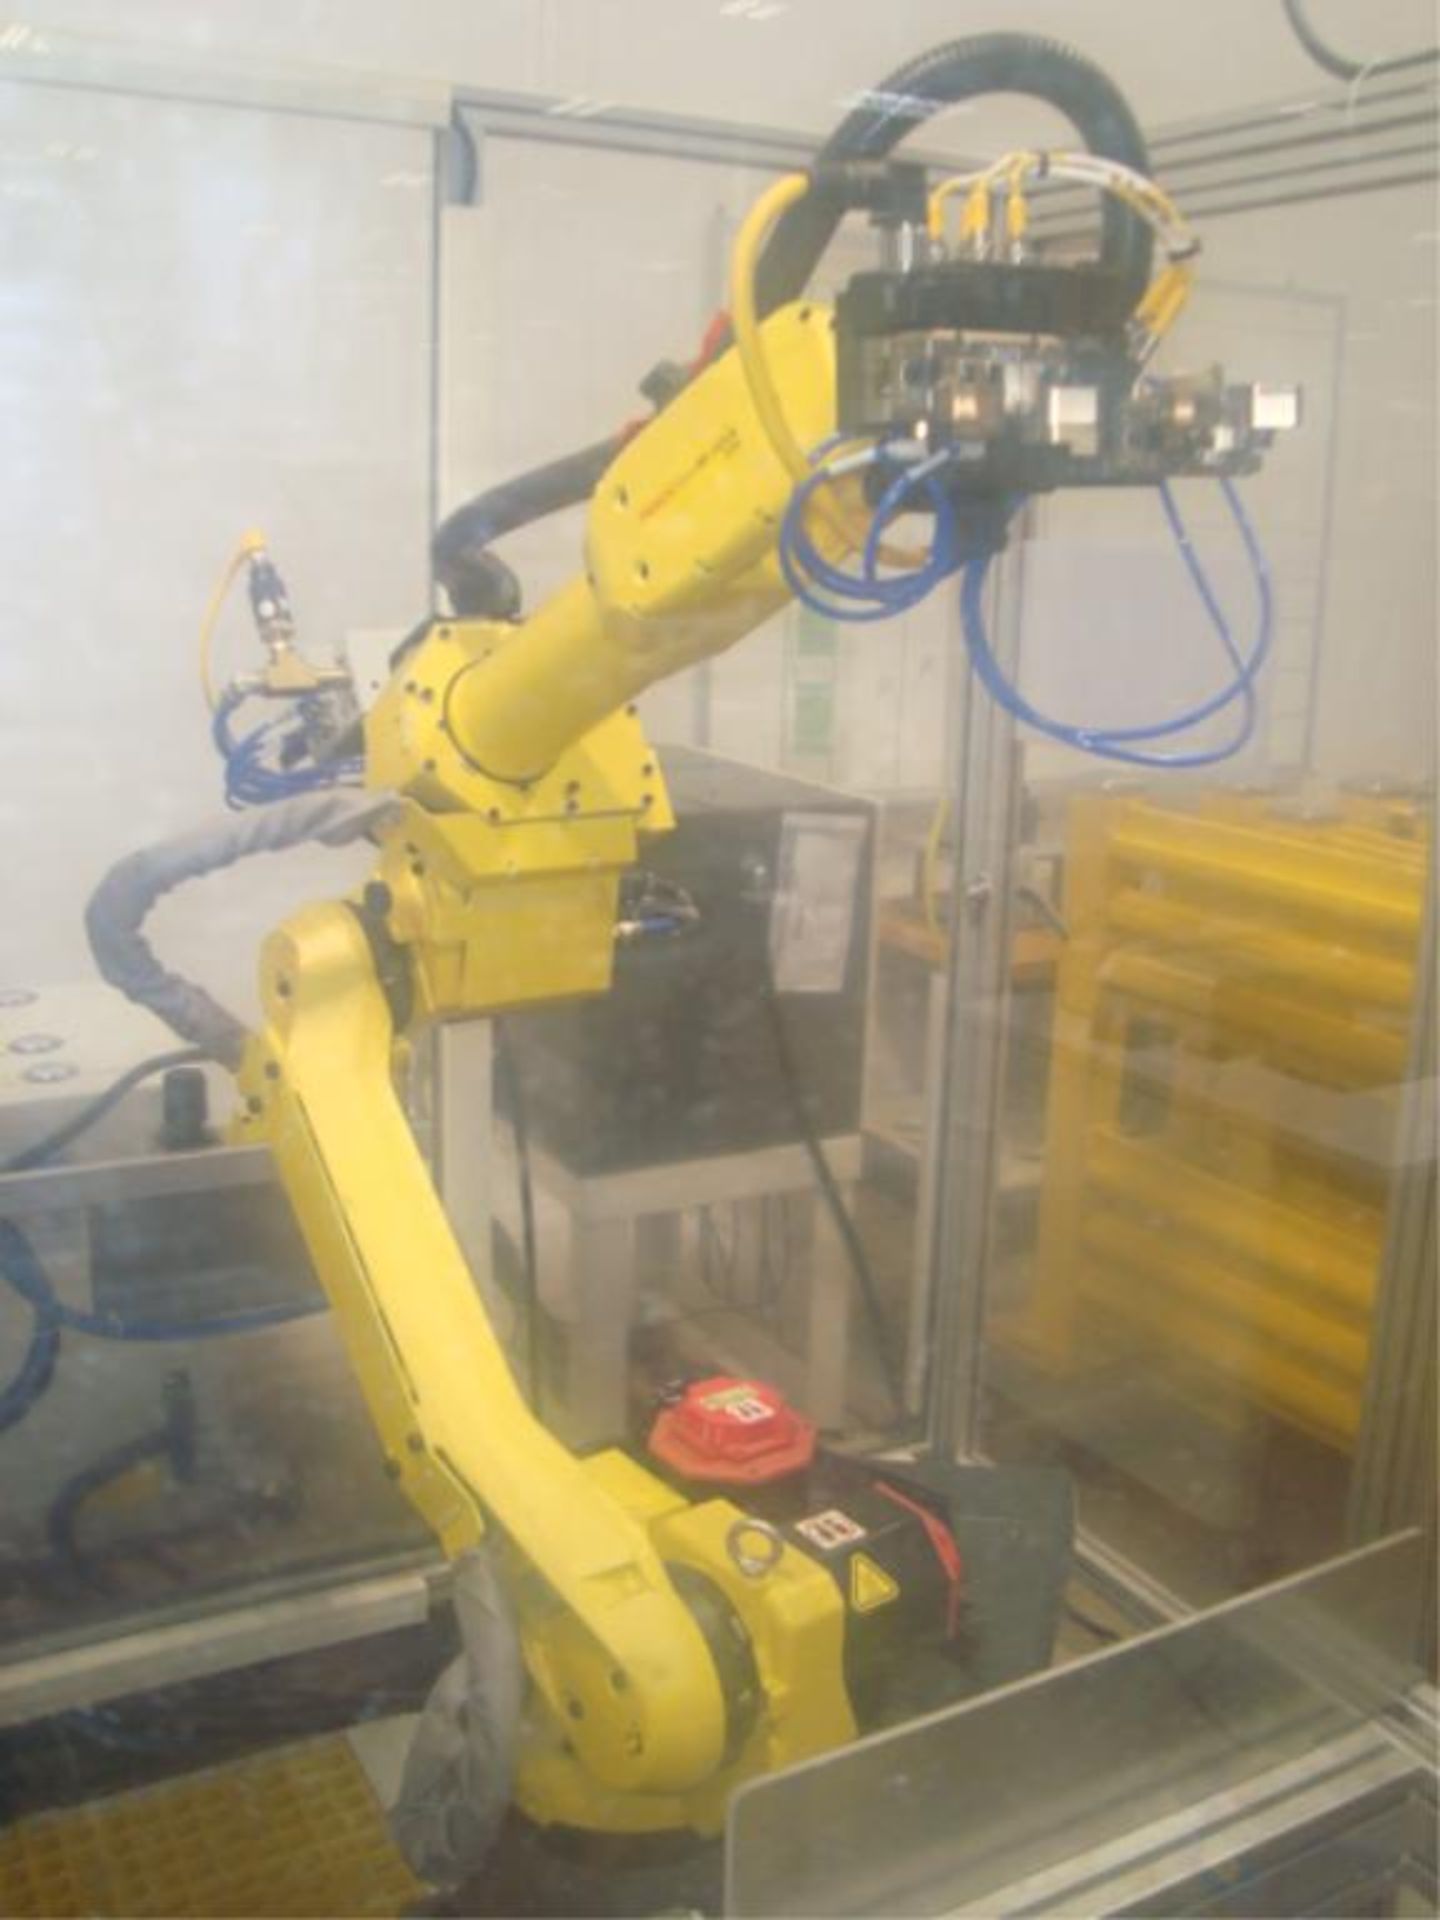 Fanuc Robodrill Alpha-D21MiA5 with Fanuc M-10iA 6-Axis Robot - Image 8 of 60